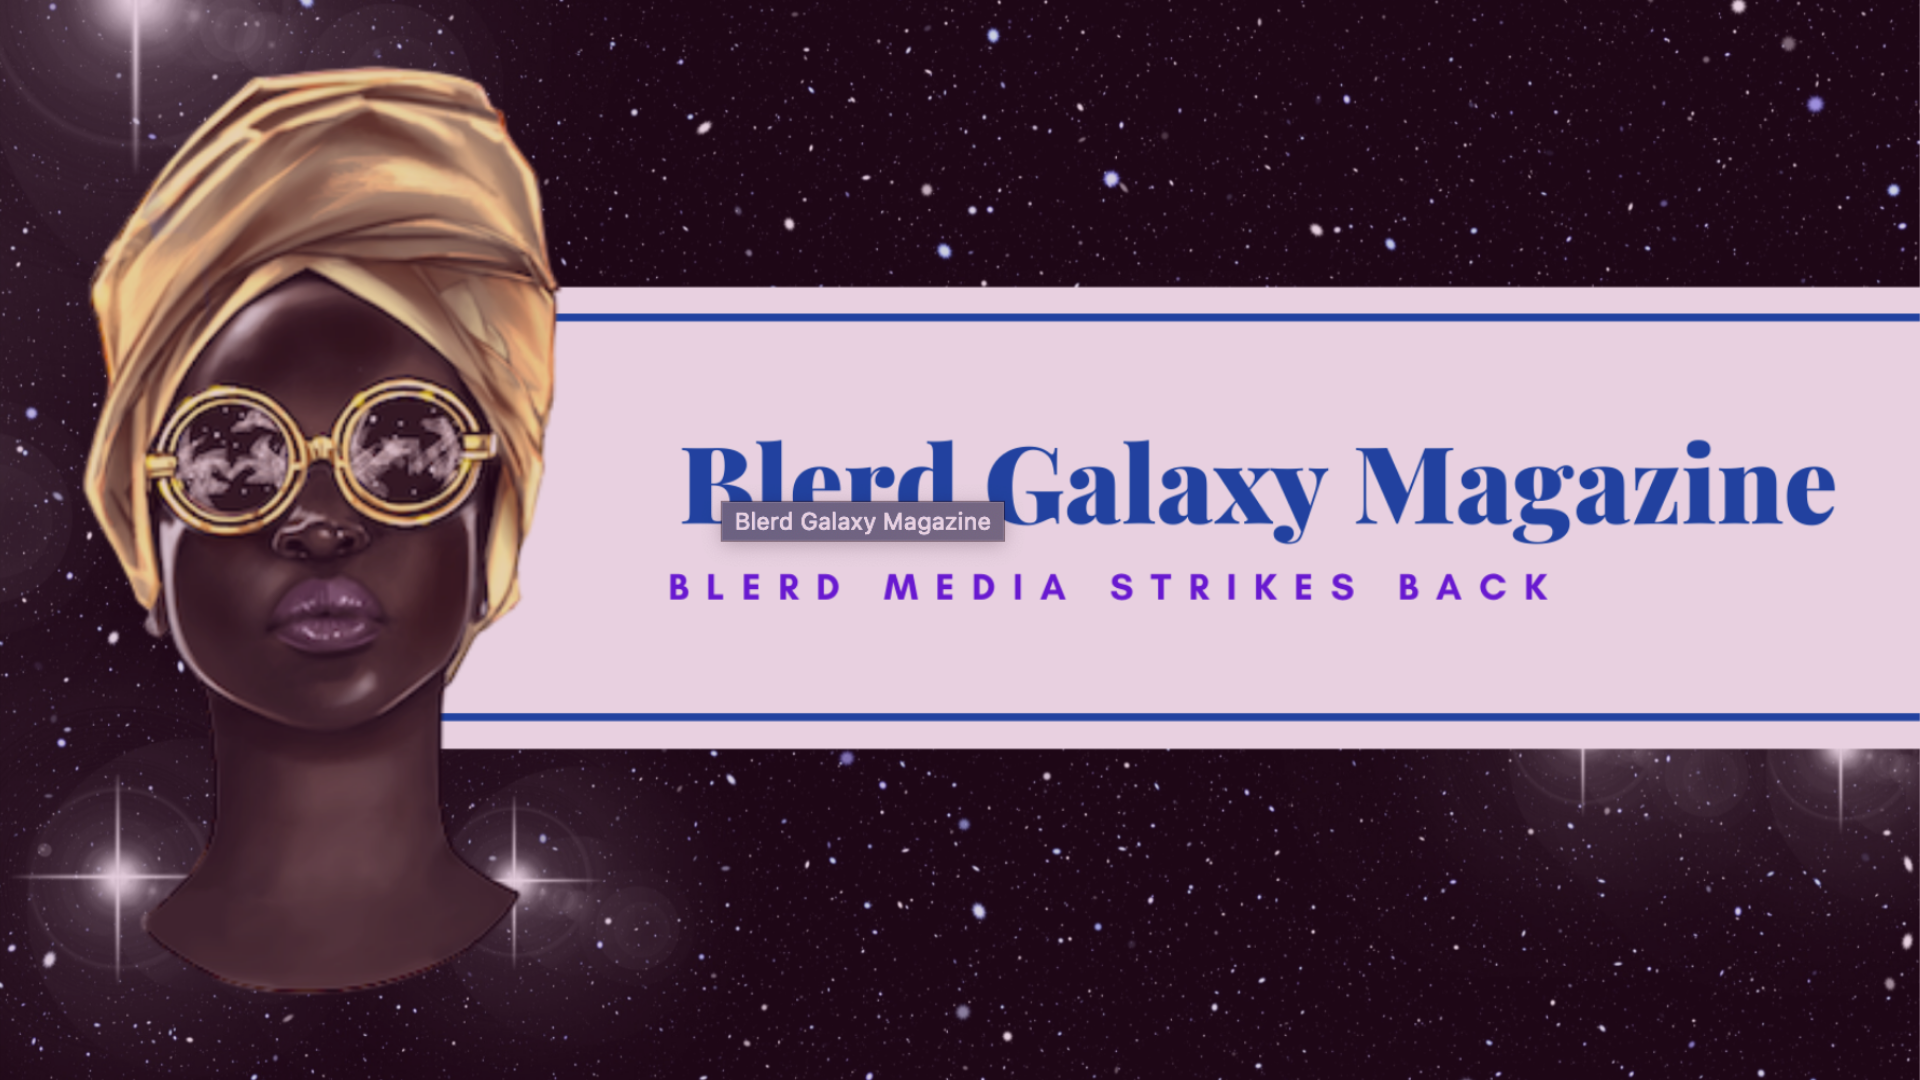 Fearsome Foursome: The Women Behind Blerd Galaxy